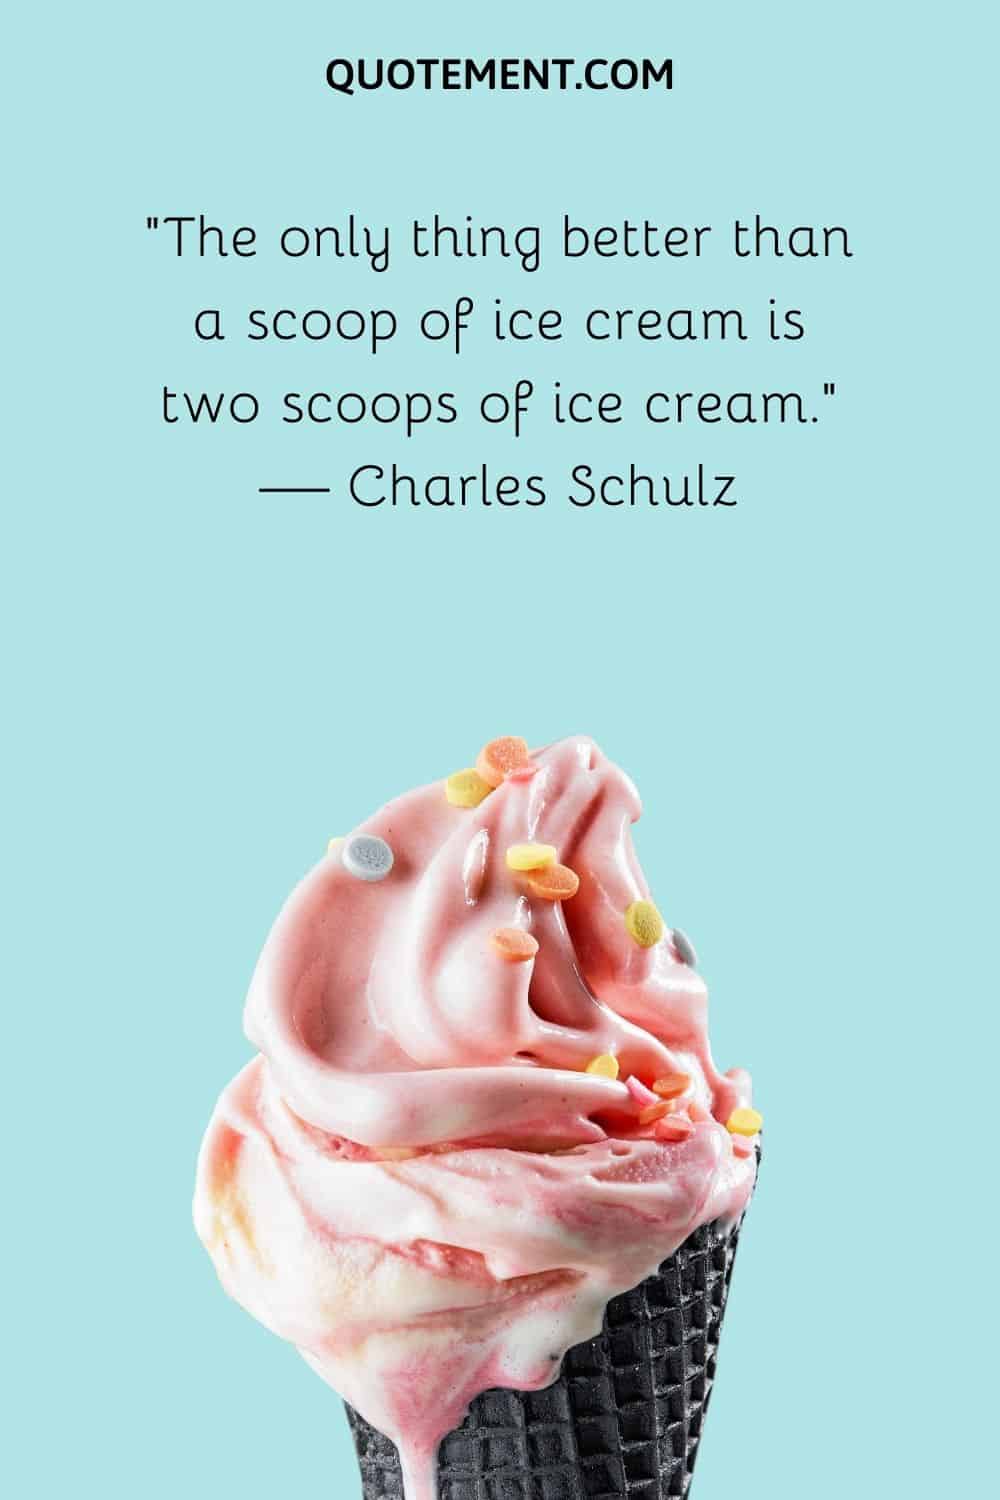 The only thing better than a scoop of ice cream is two scoops of ice cream